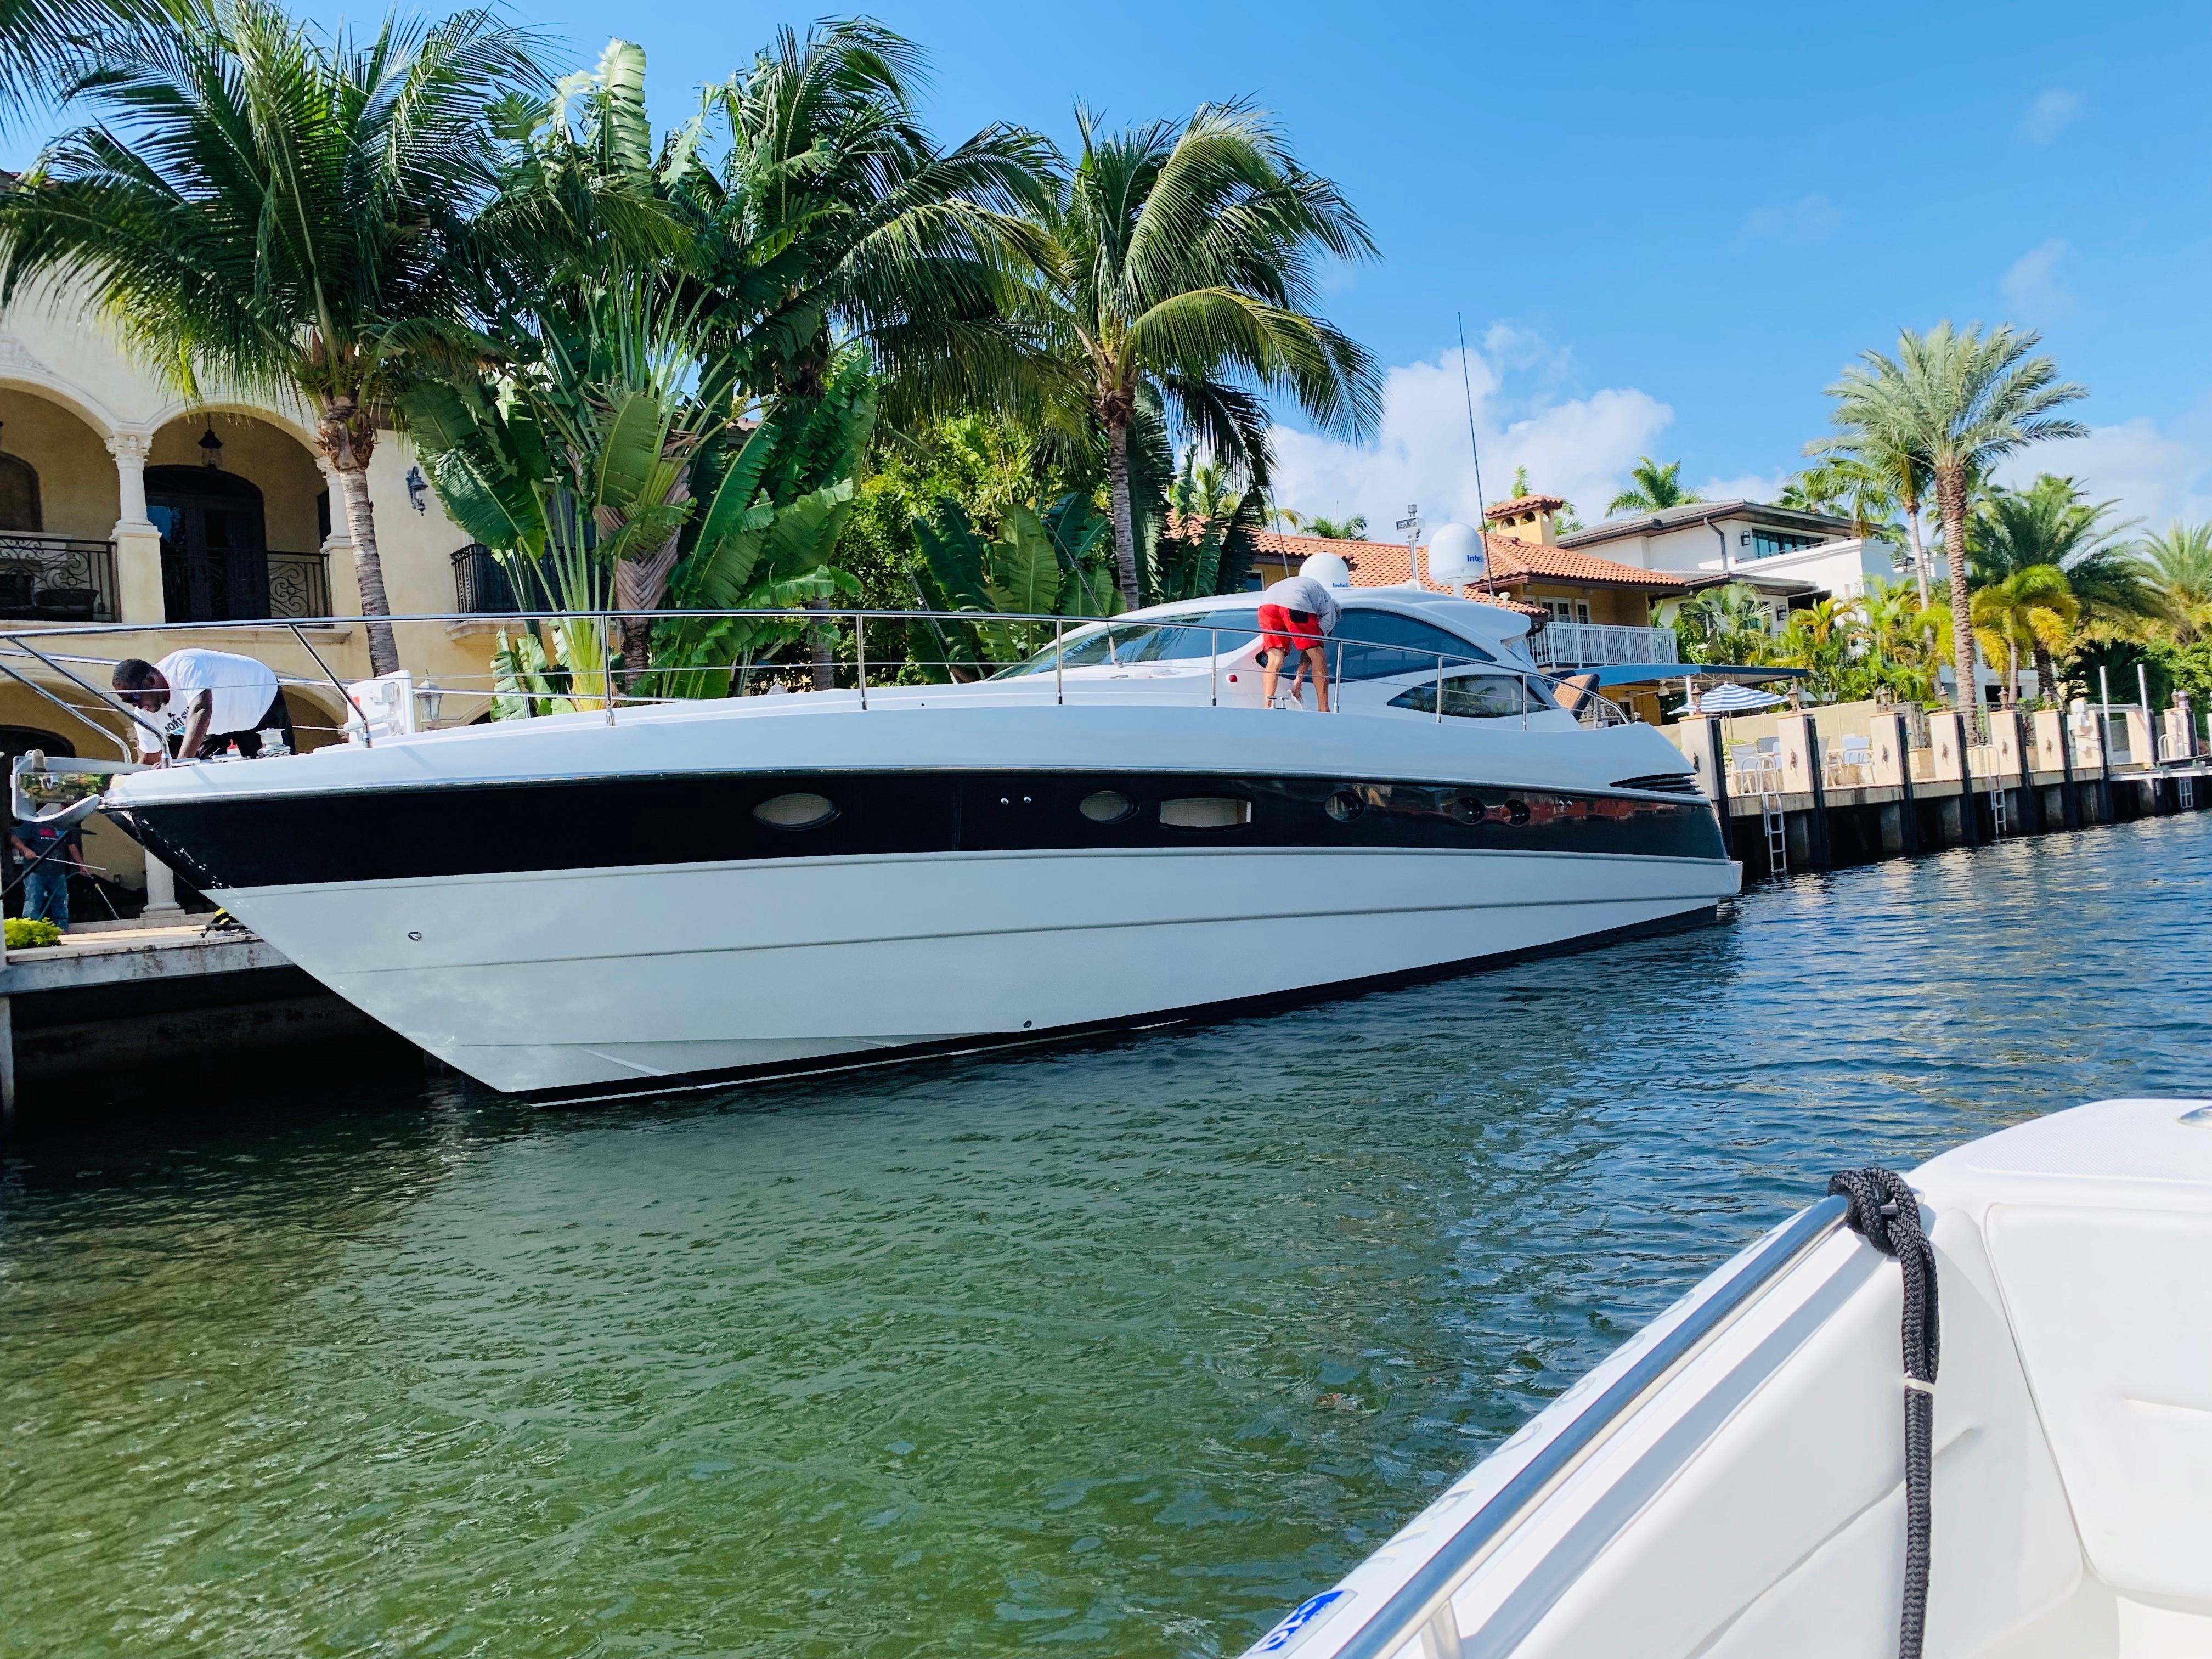 50 ft yacht for sale florida